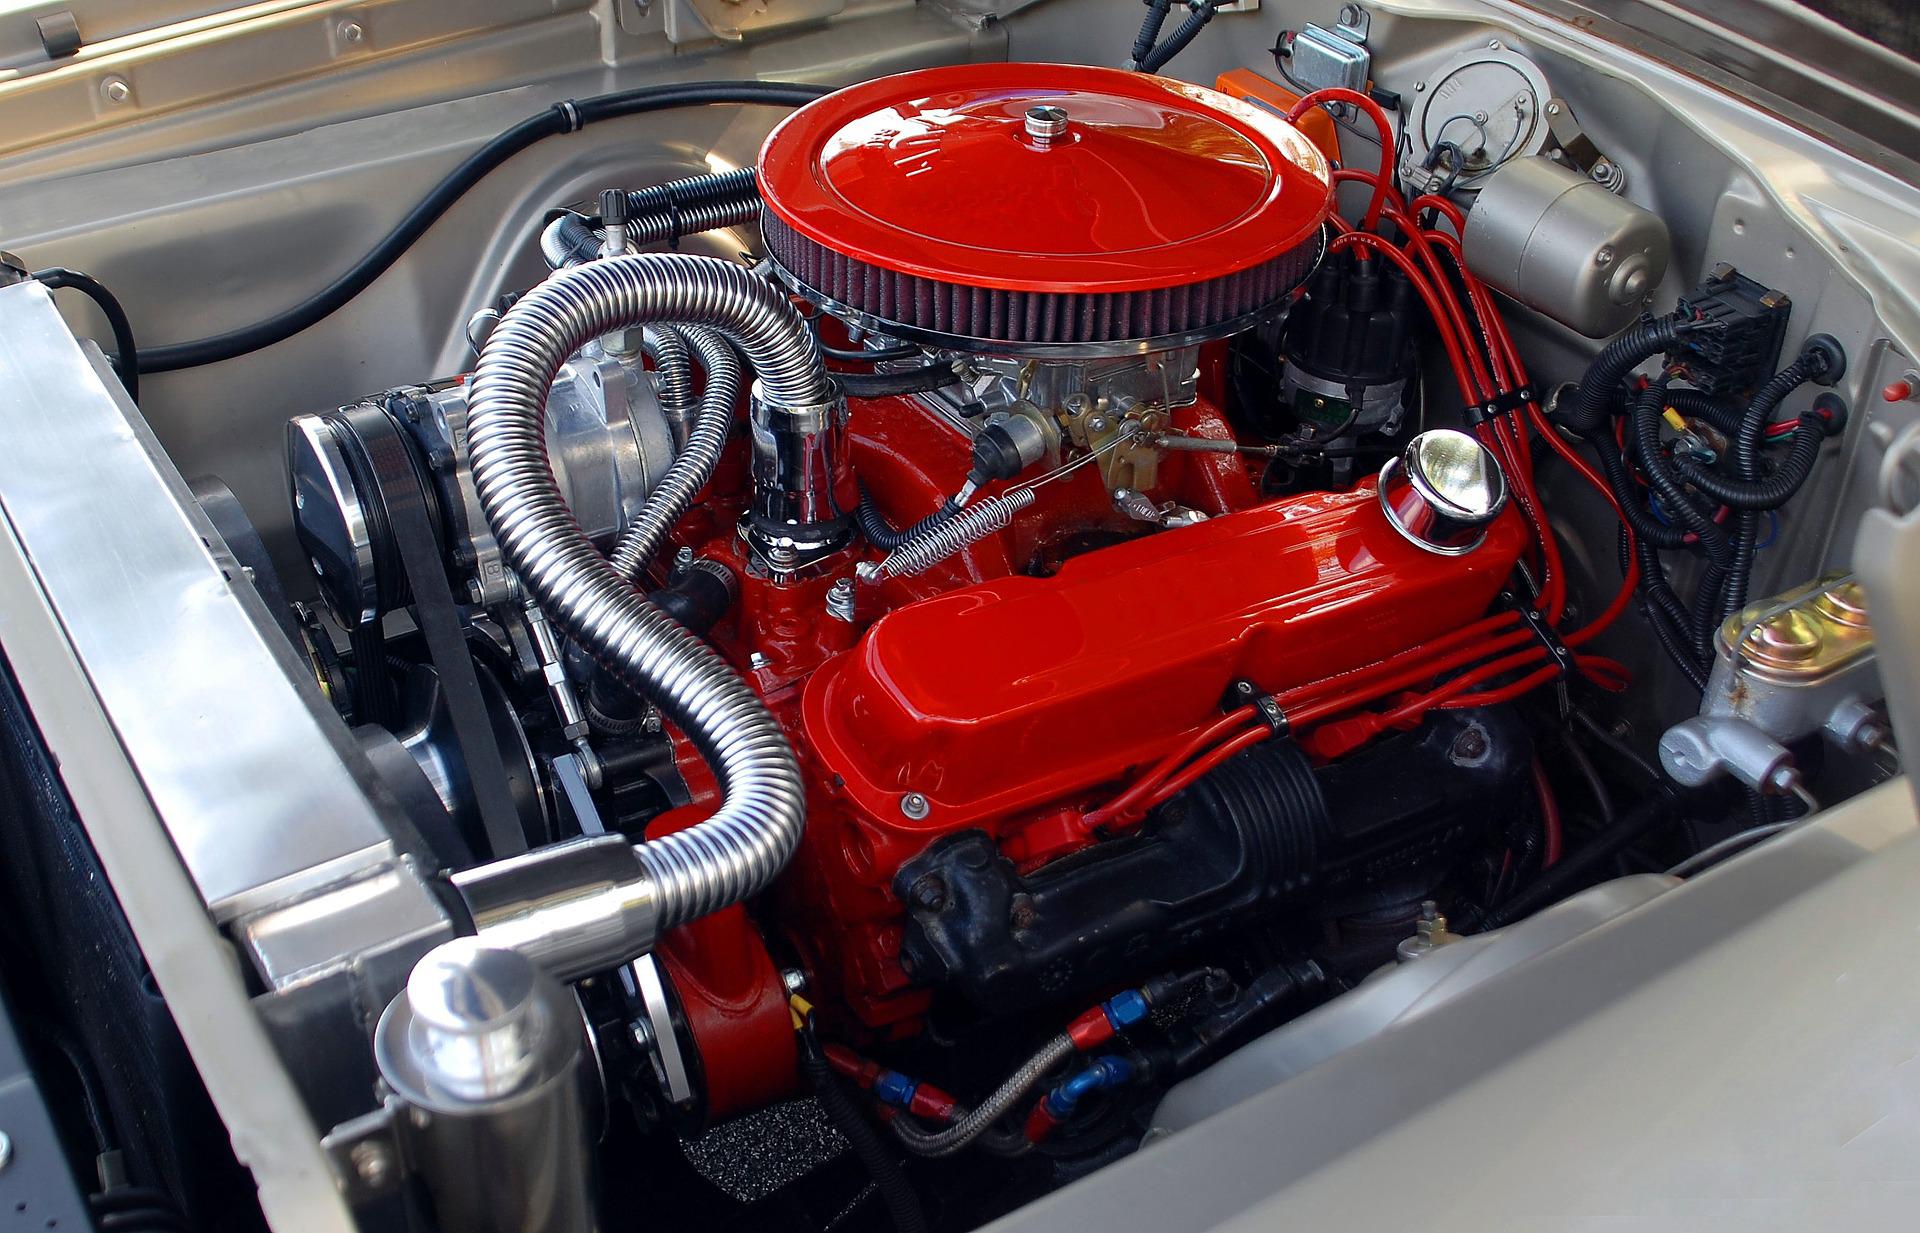 A red and silver car engine